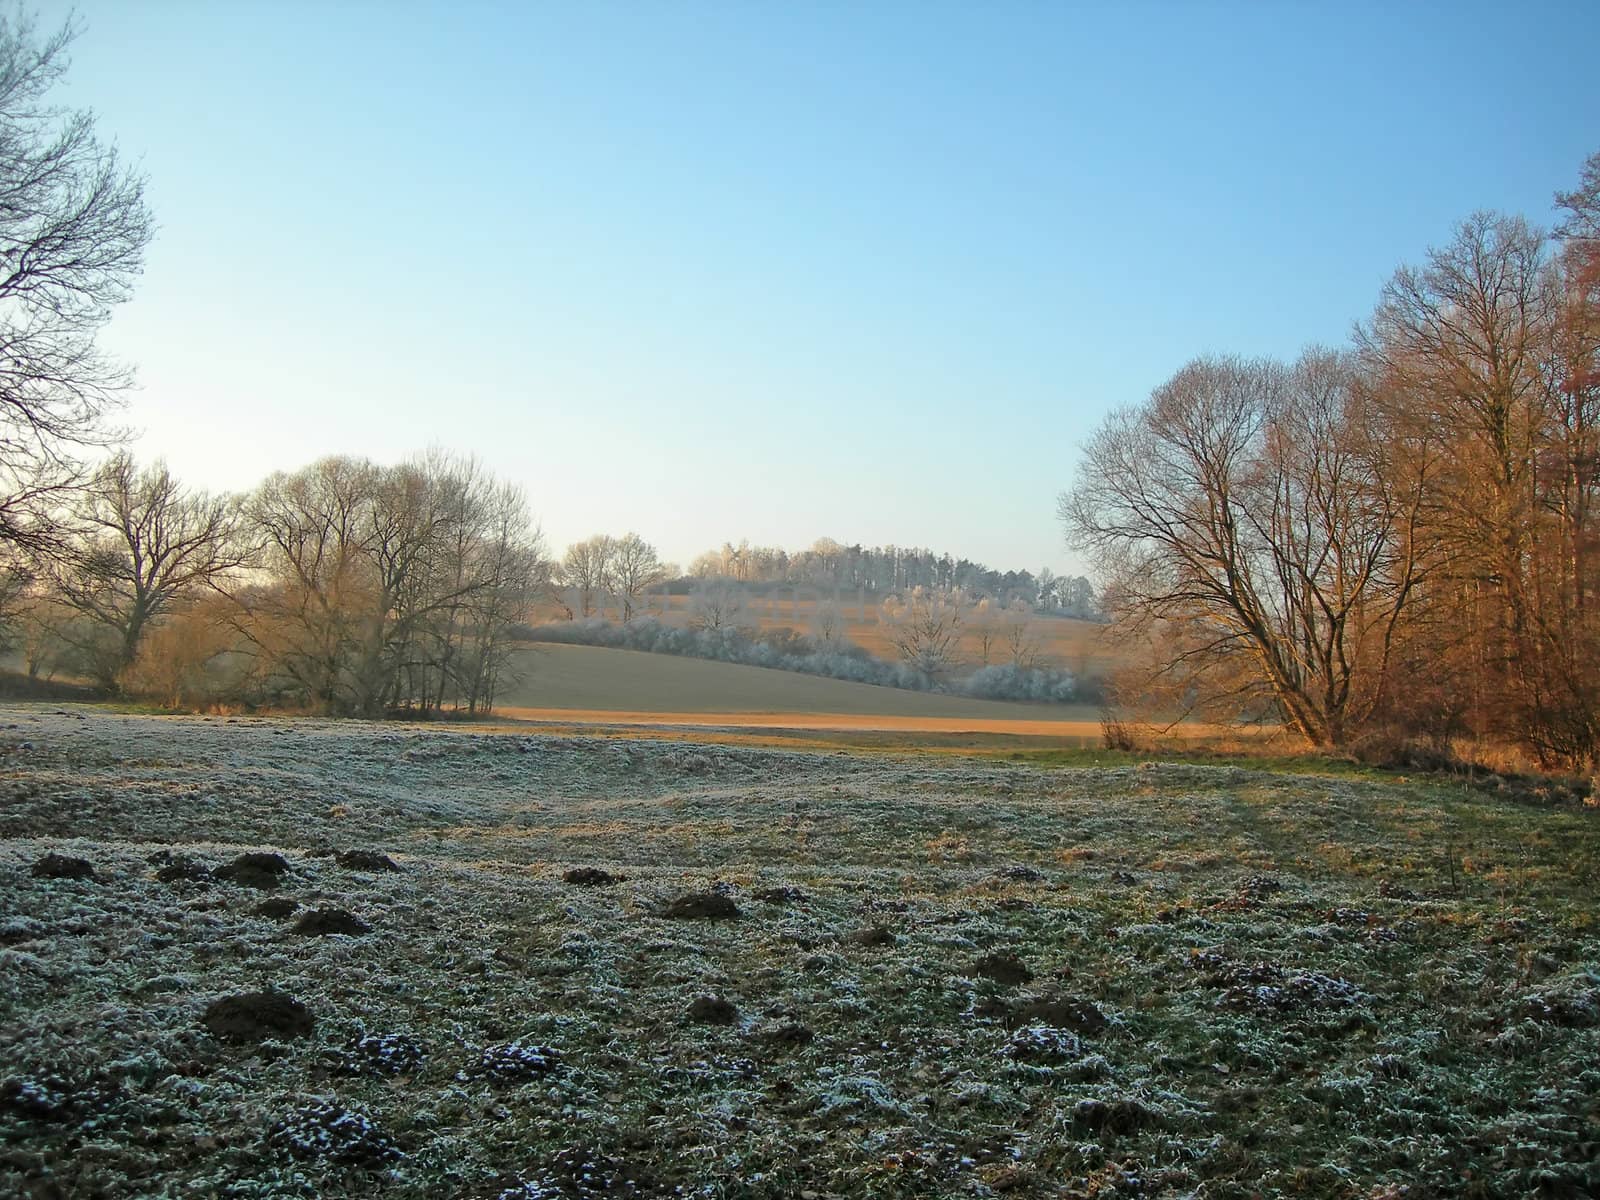        Ploughed field and forest covered with snow in winter in misty atmosphere     